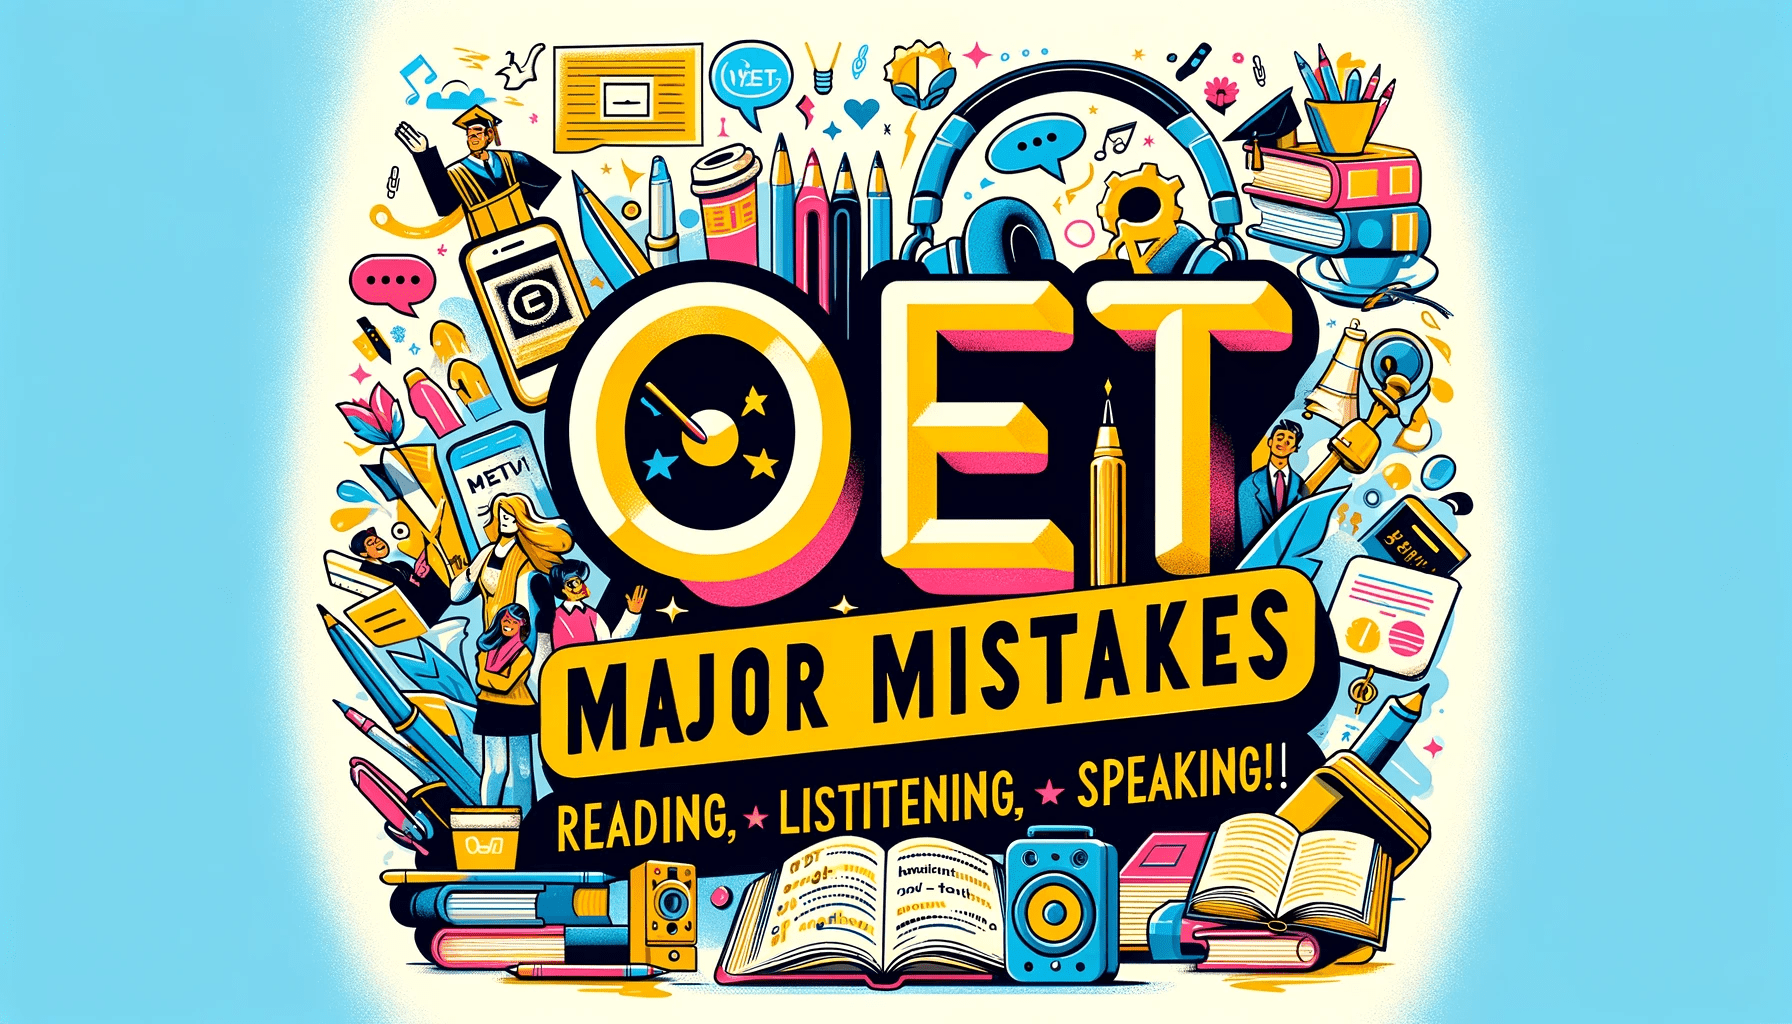 Ace OET: Get expert tips on overcoming typical errors in all modules. Enhance your writing, speaking, reading, and listening skills!